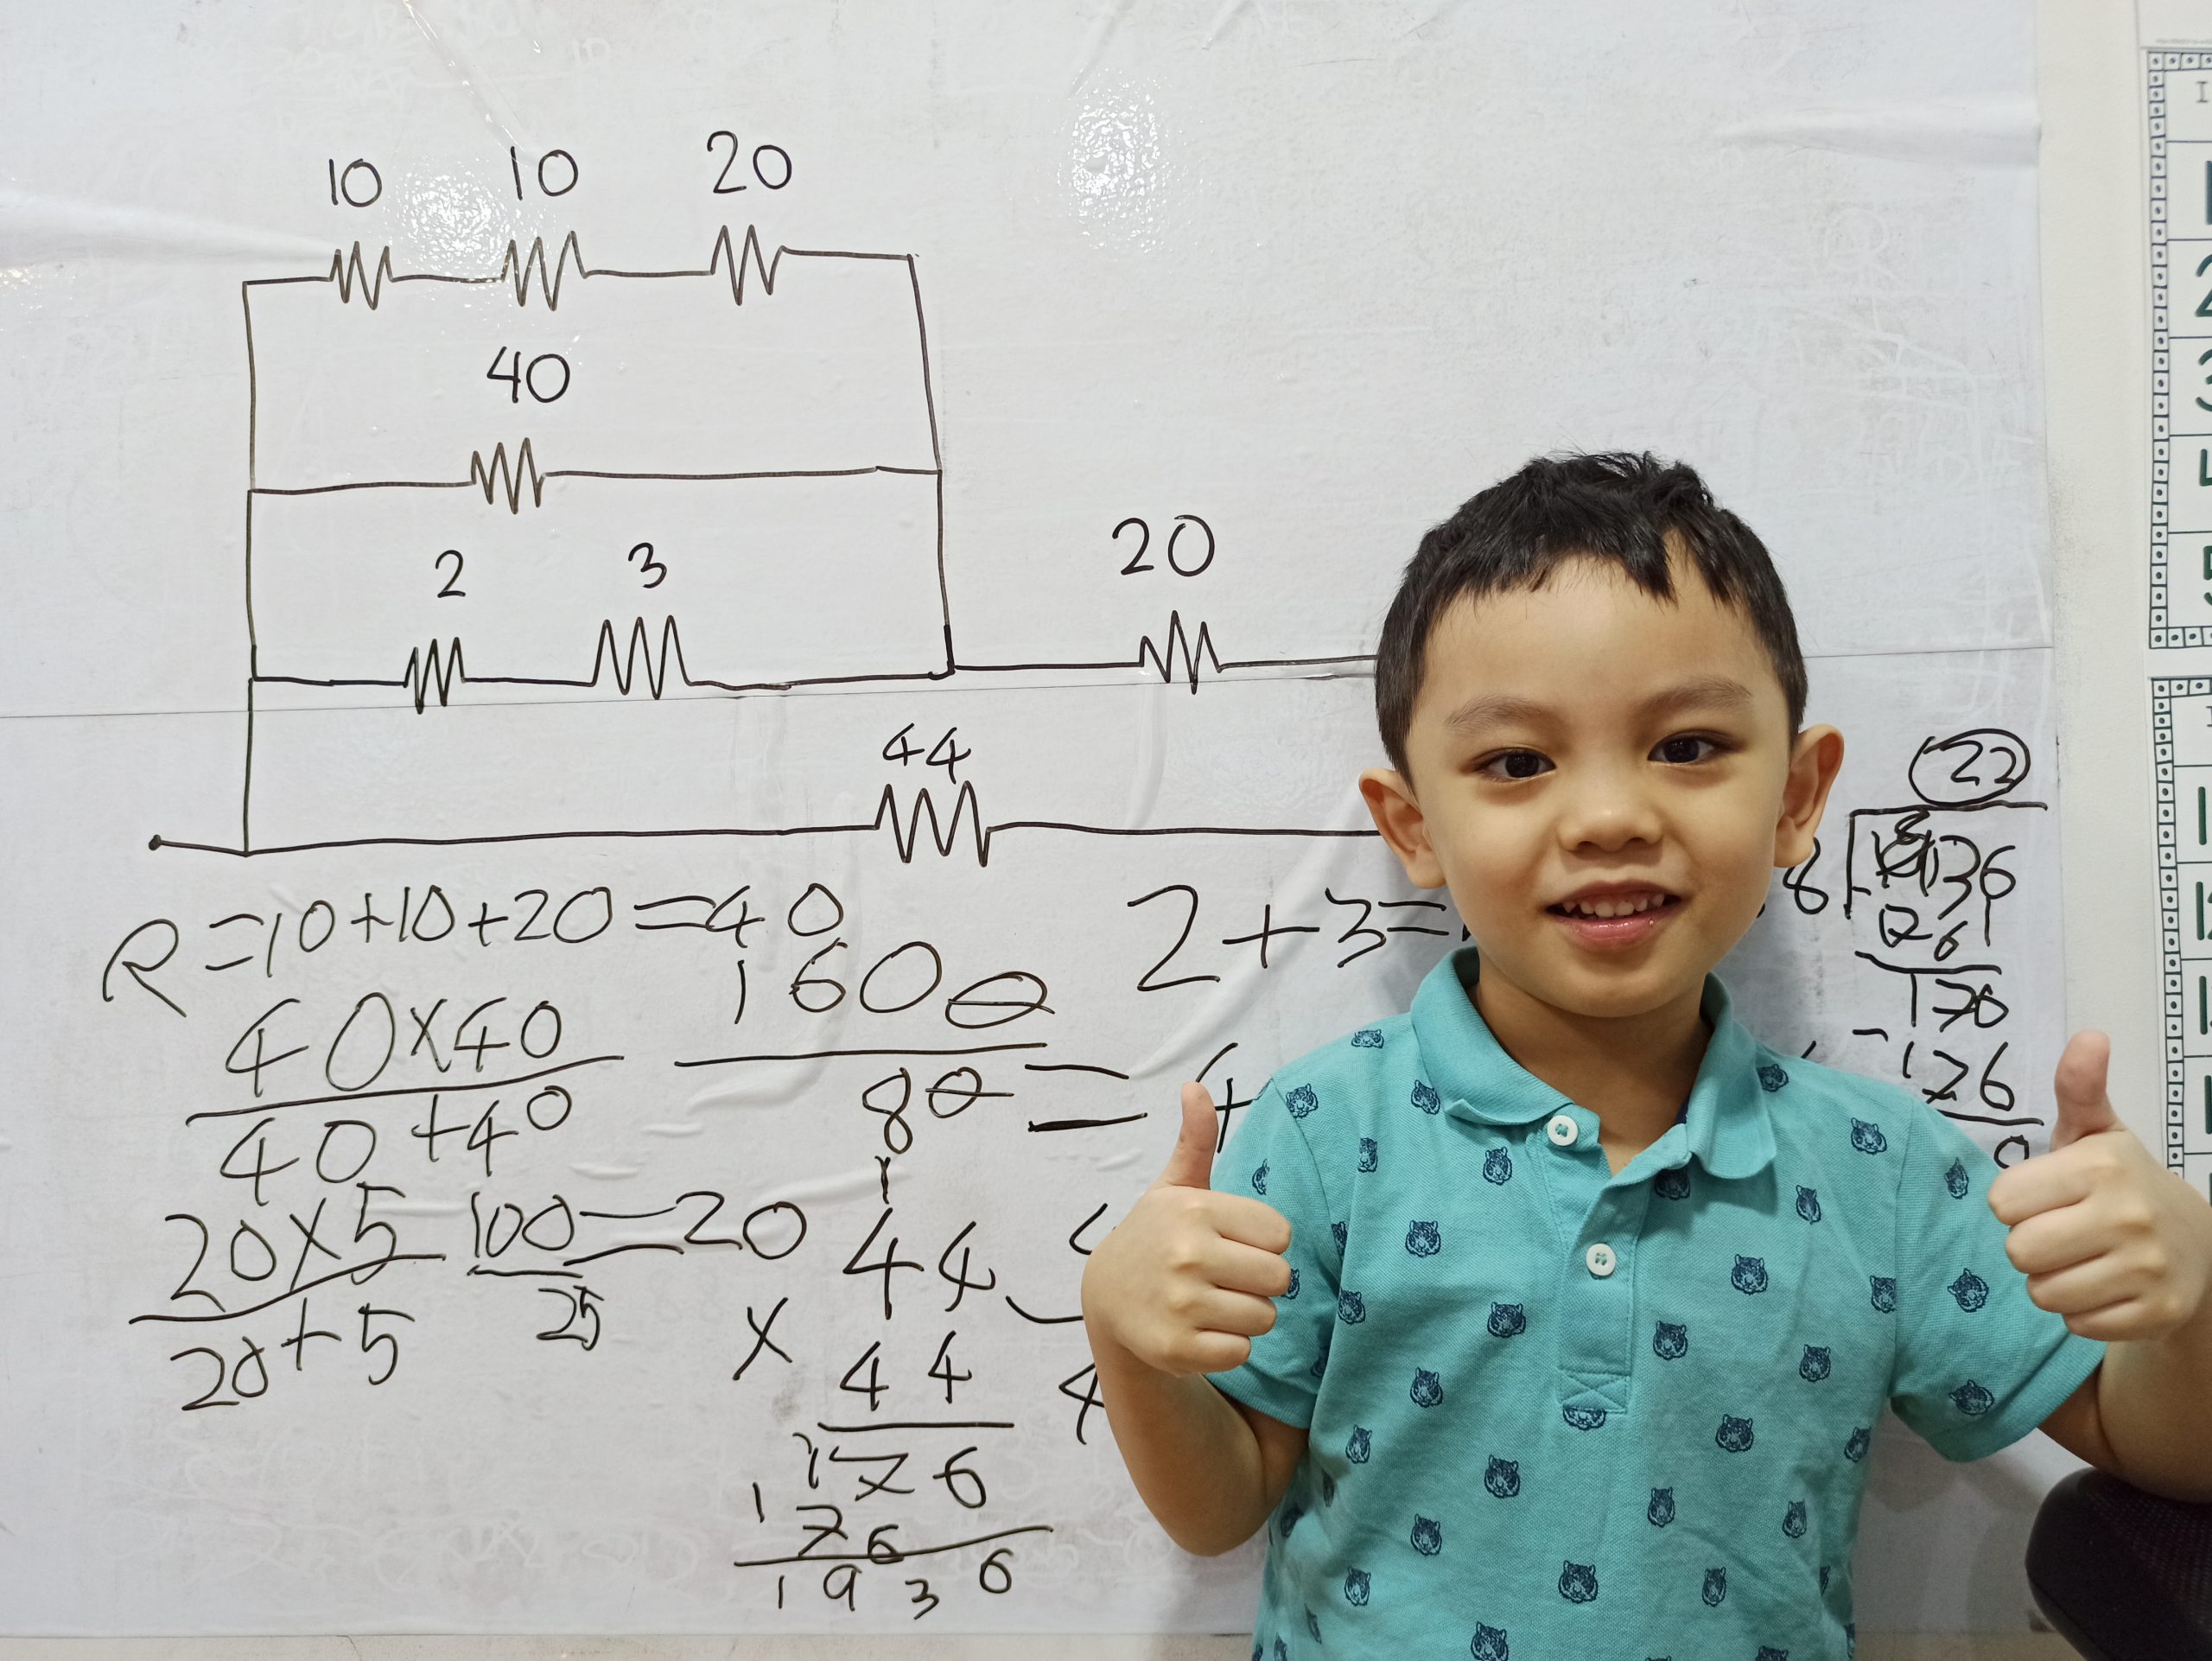 A Genius is Born: 4-Year-Old Boy is Able to Solve Basic EE, Among Others